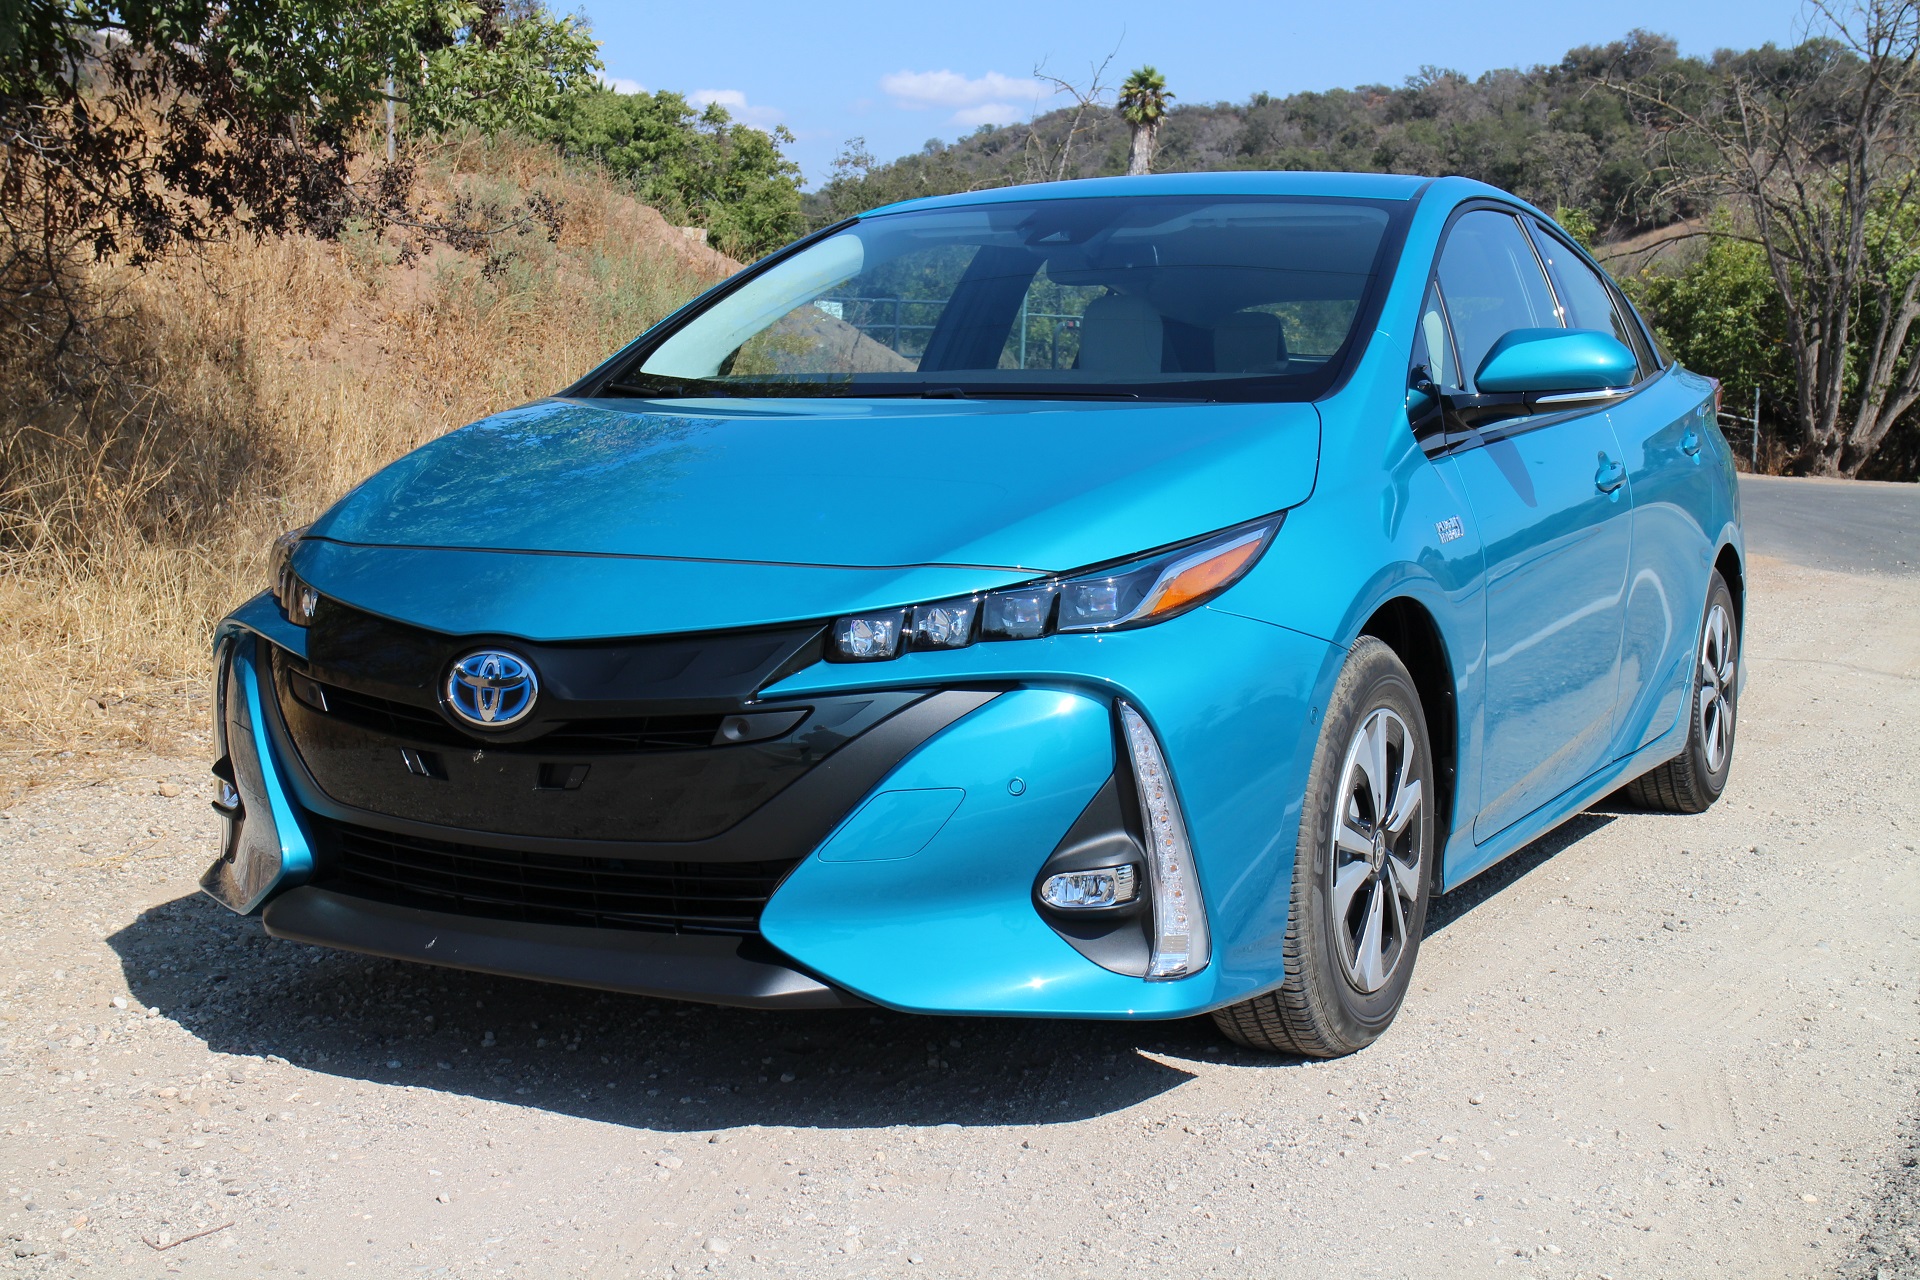 Best deals on plug-in, hybrid, and electric cars for May 2019
